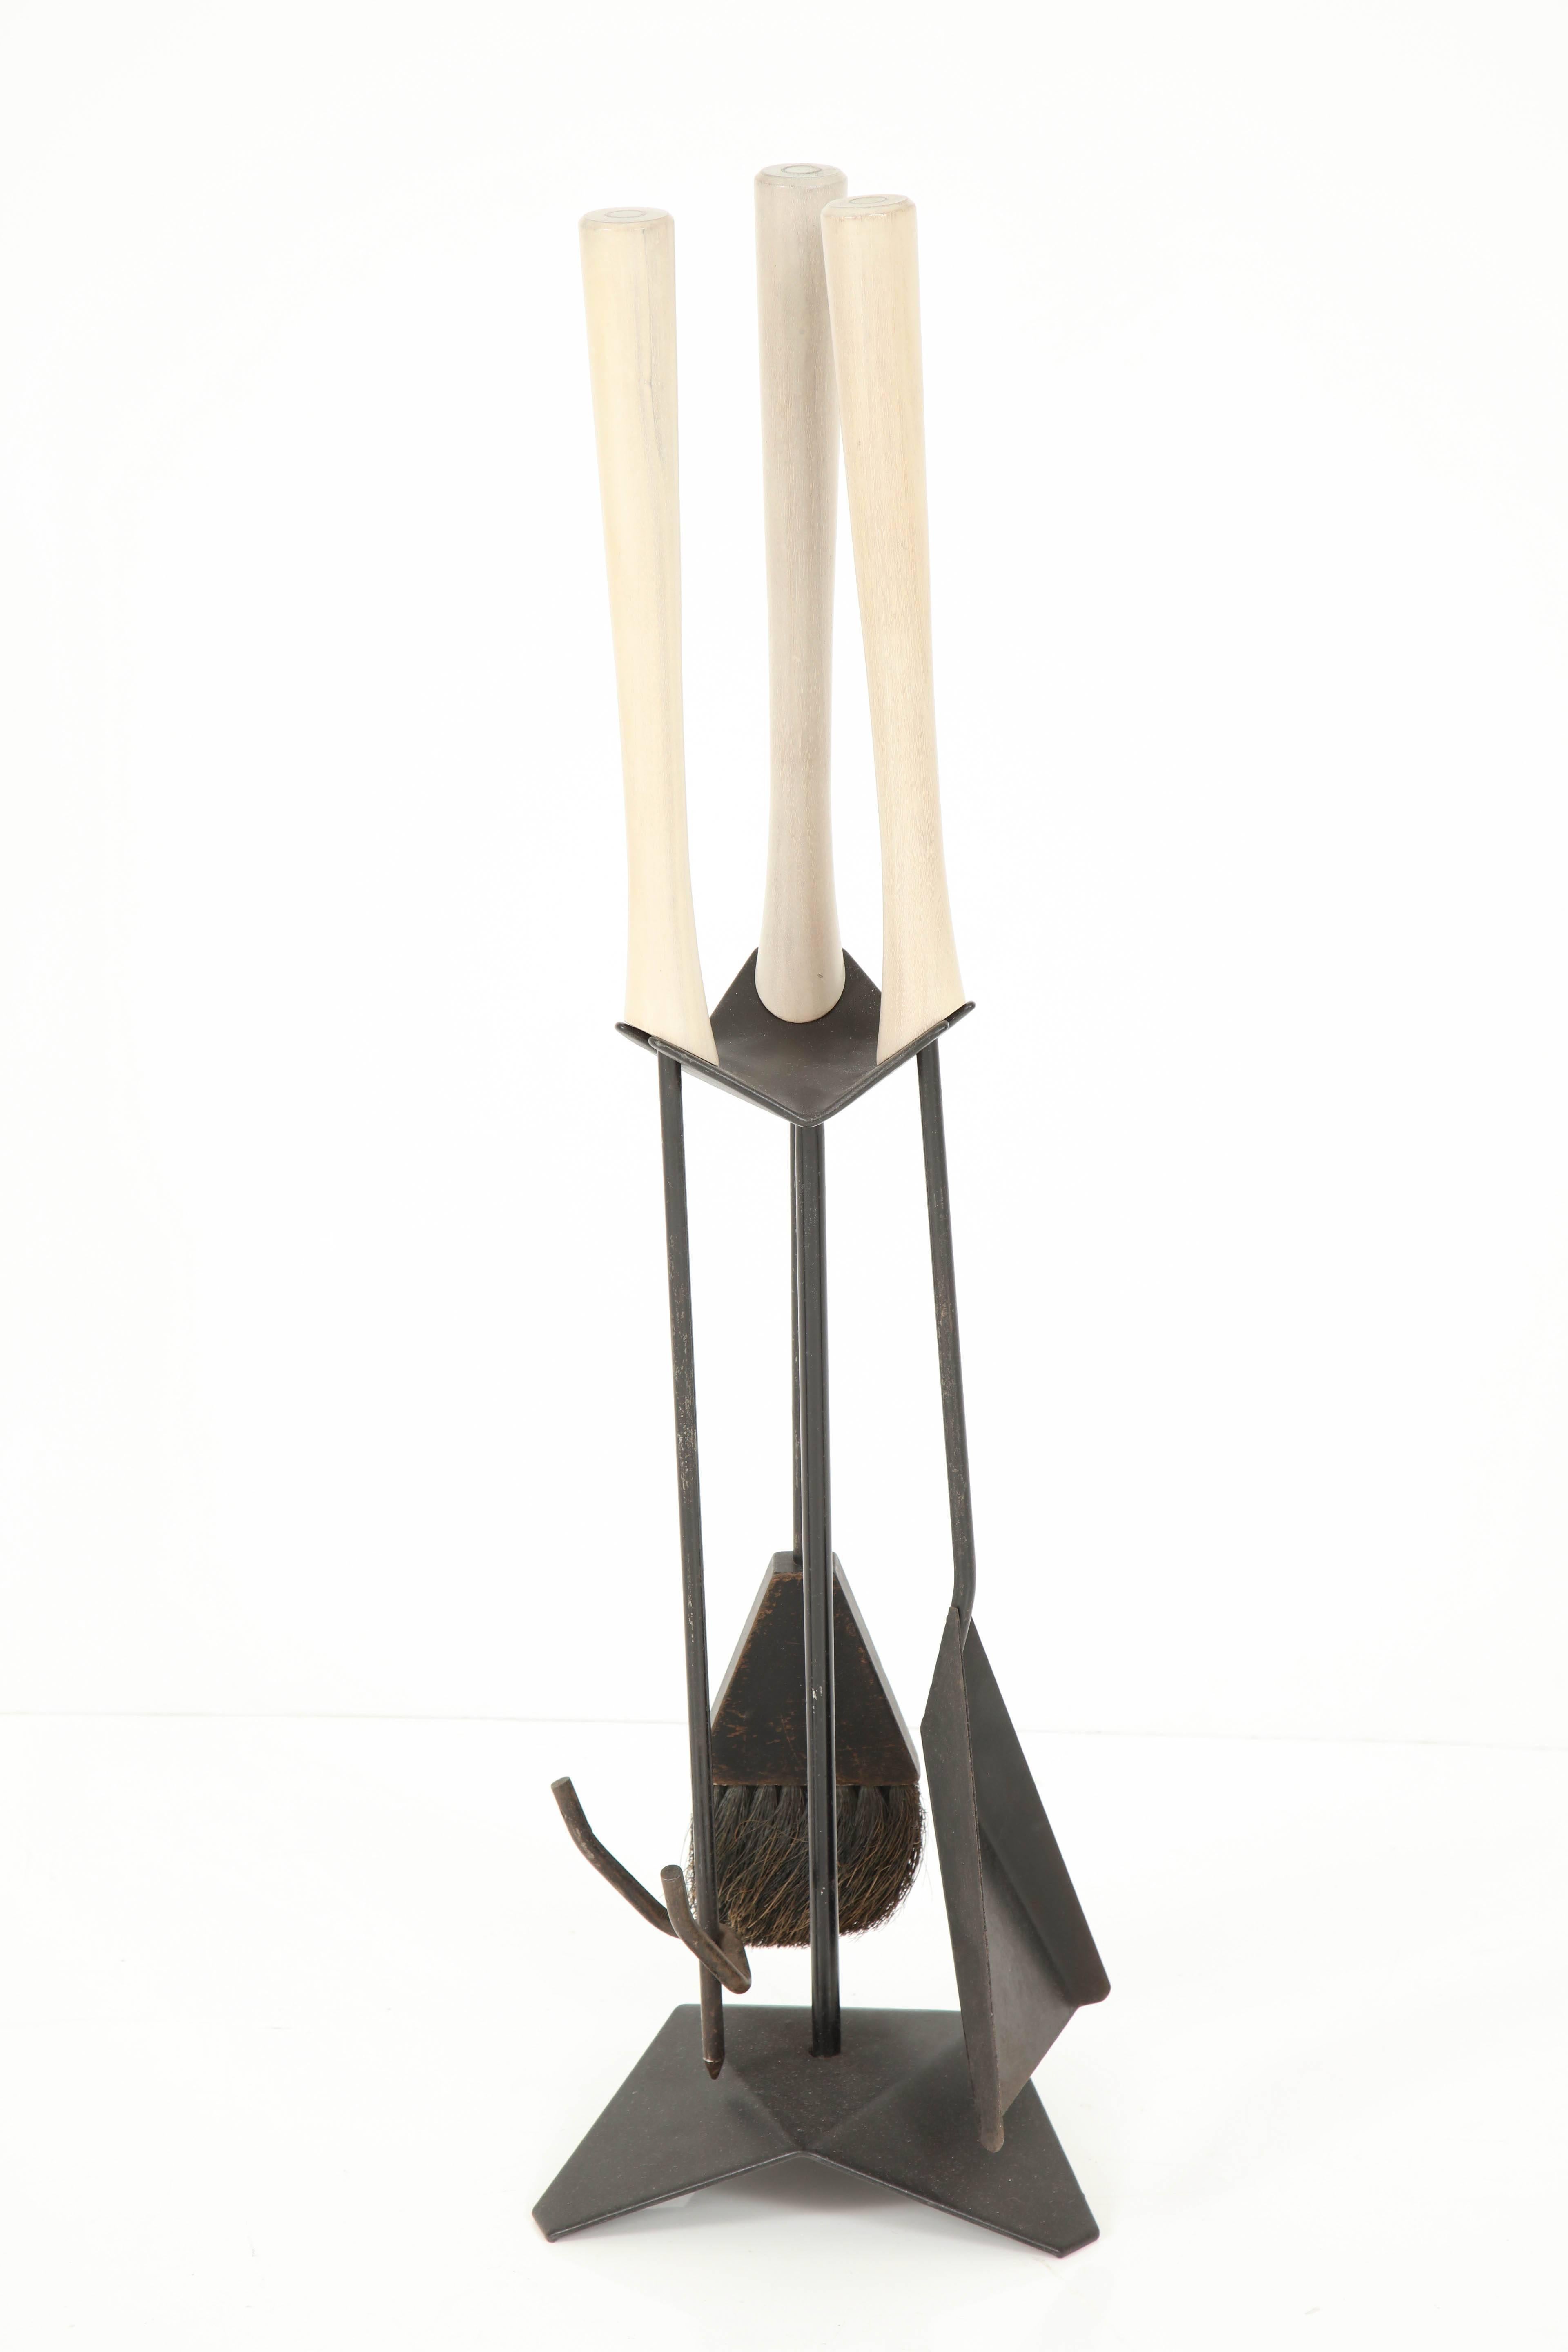 Mid-20th Century Modernist Fireplace Tools